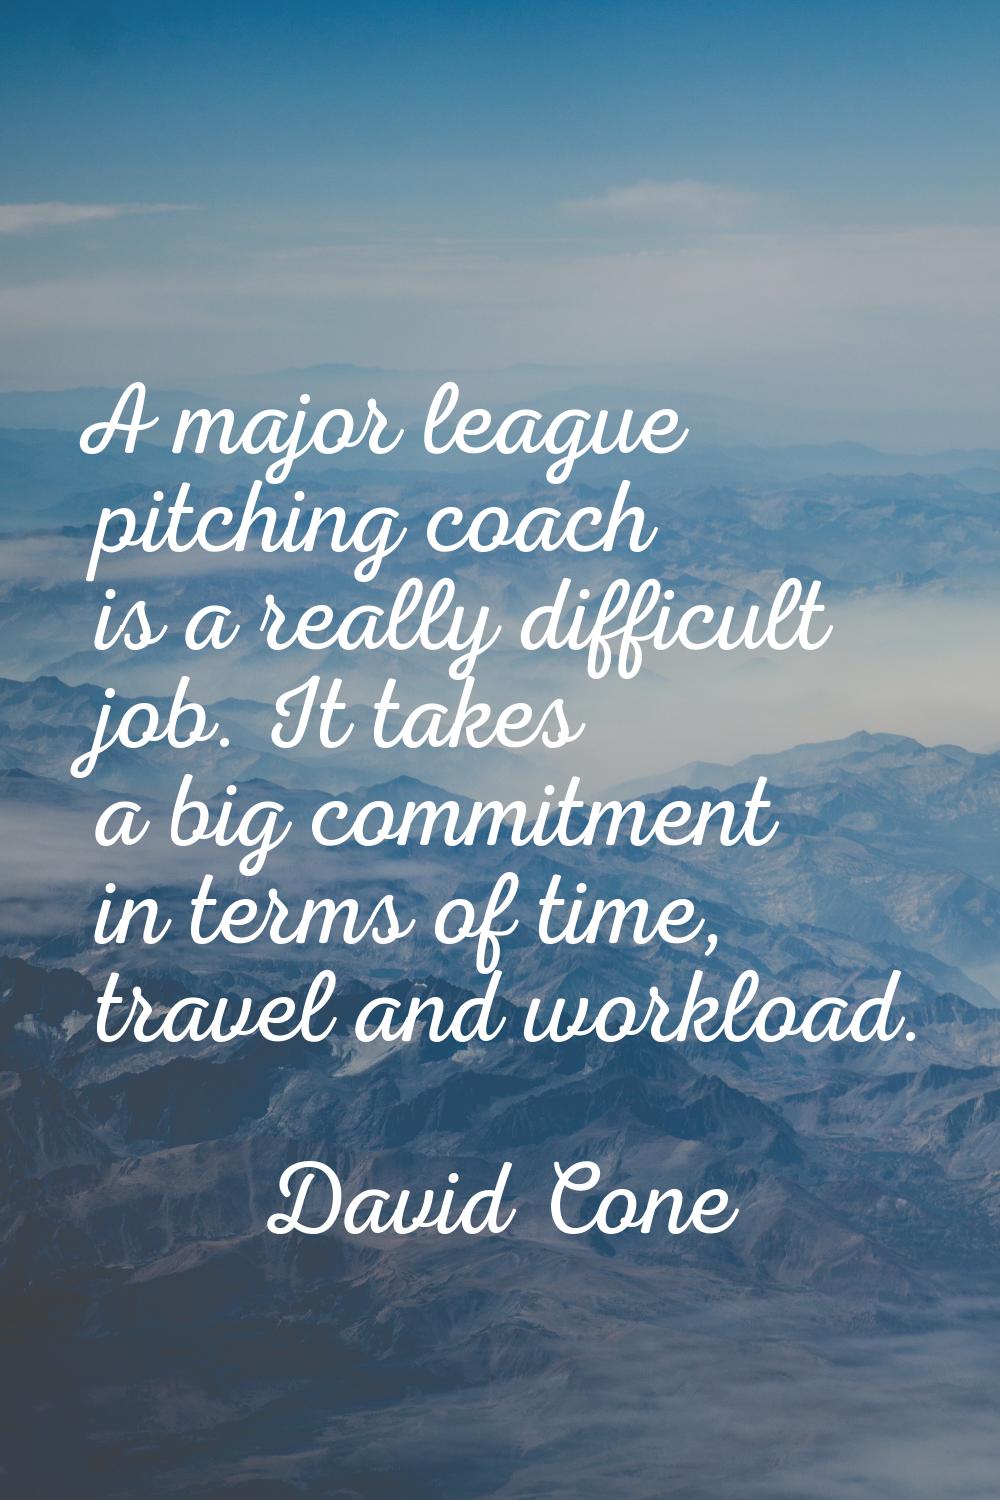 A major league pitching coach is a really difficult job. It takes a big commitment in terms of time